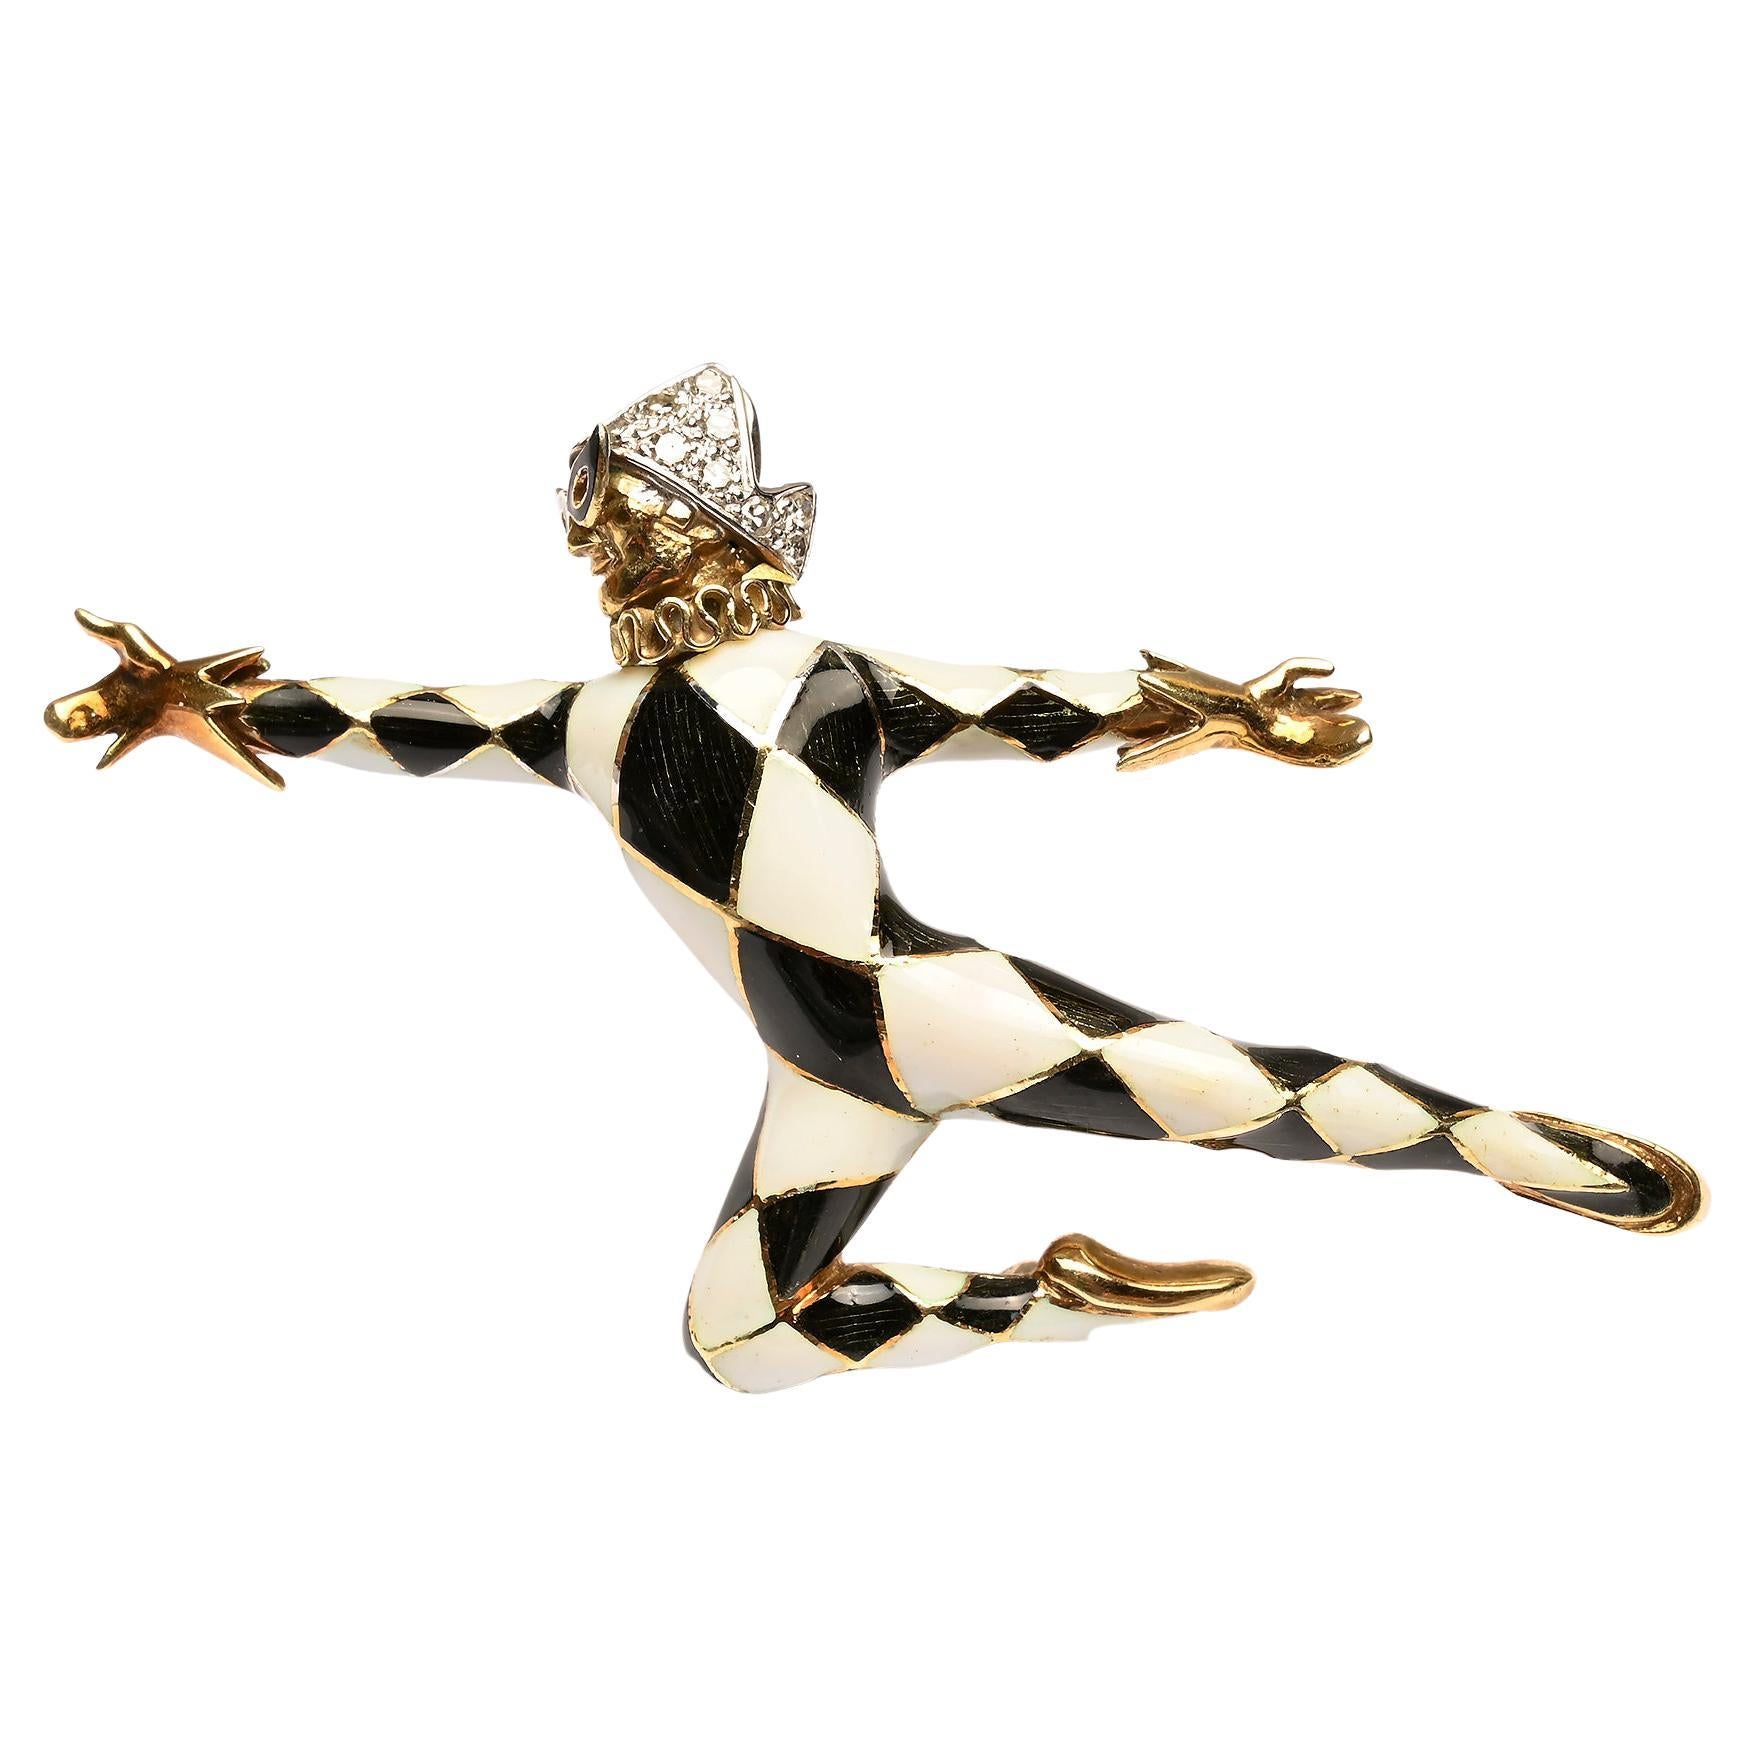 Gold and Enamel Jester Brooch